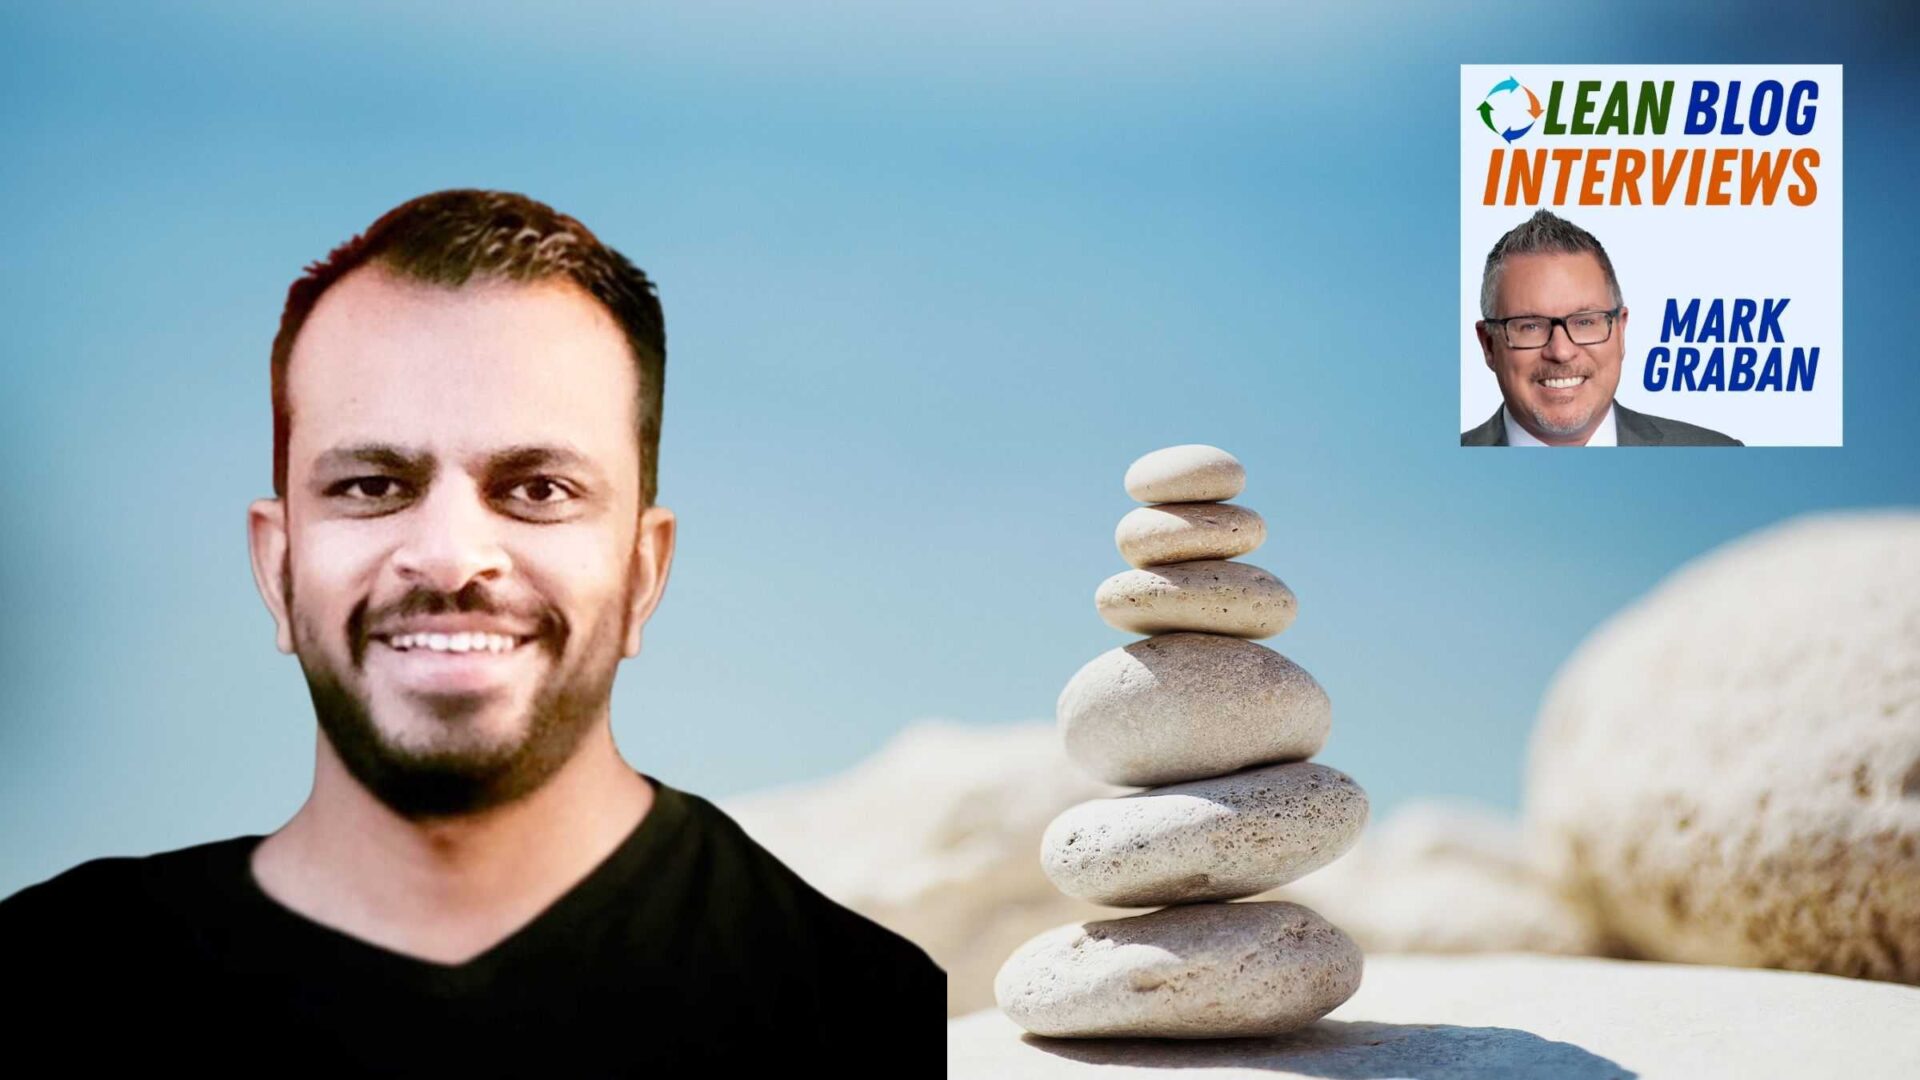 Interview with Mit Vyas: Insights on Learning from Toyota, Entrepreneurial Success, and Mindfulness Practices